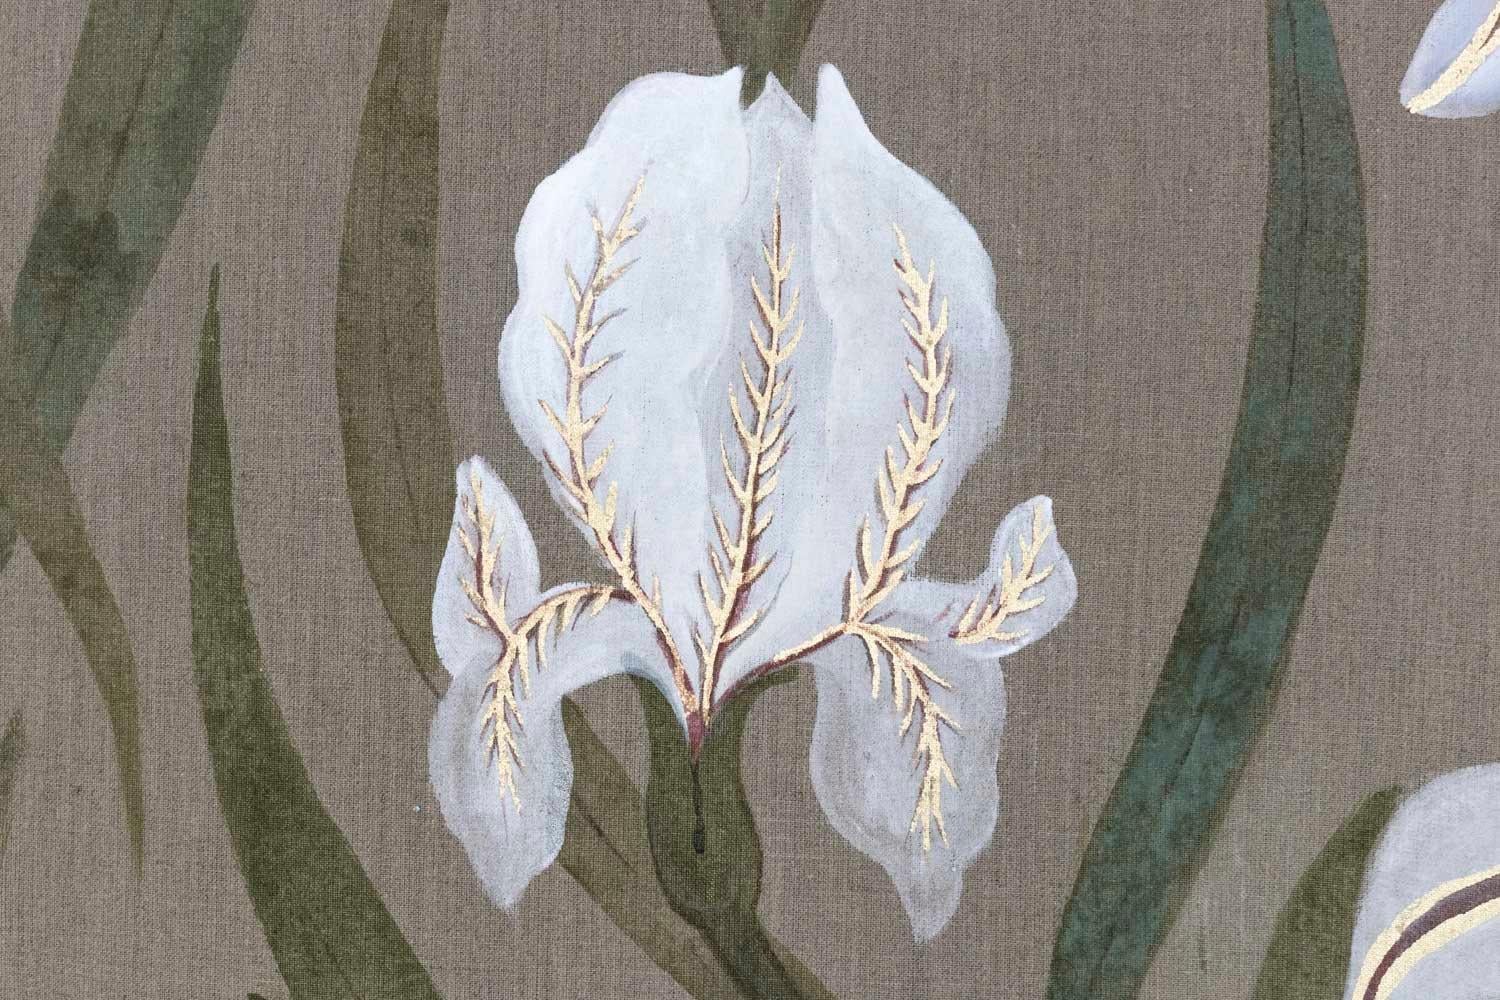 Painted canvas figuring two monkeys, one bird and one dragonfly on leaves and flowers of white iris, with gilt highlights. The background shows the raw linen.

Linen raw canvas hand painted with natural pigments and gilt motifs realized with